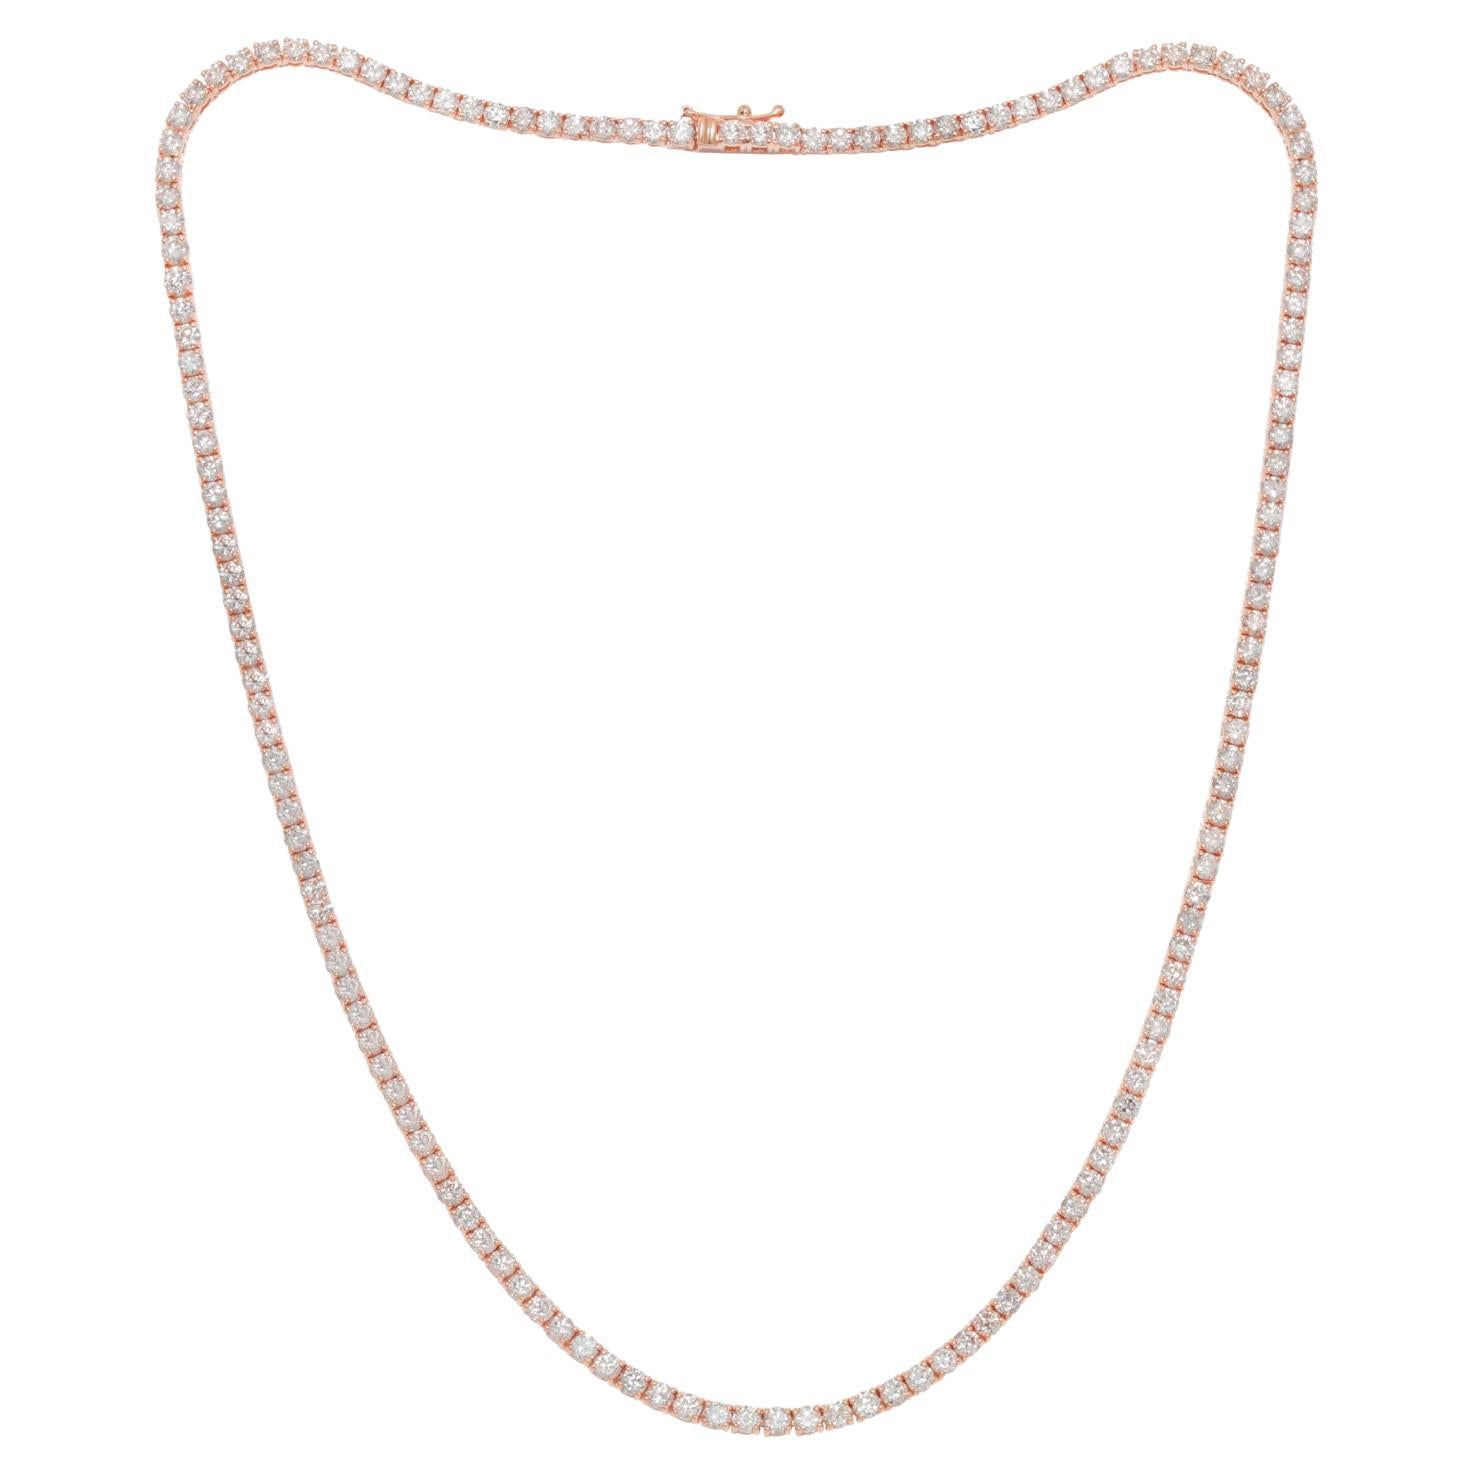 Diana M. 14kt rose gold diamond tennis necklace containing 9.70cts   For Sale